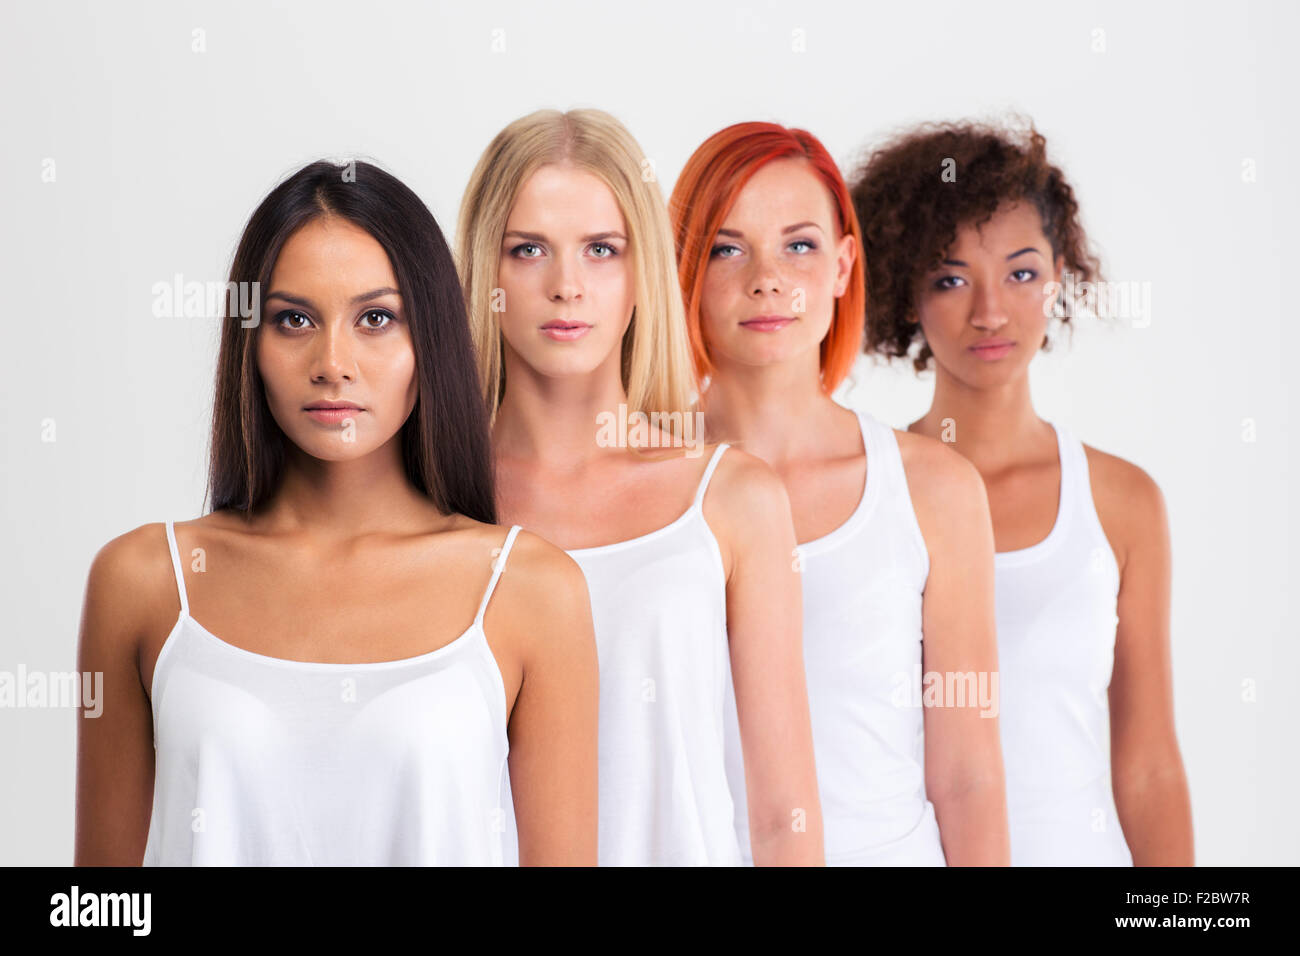 Portrait of a four serious women with colourful hair standing in a row isolated on a white background Stock Photo